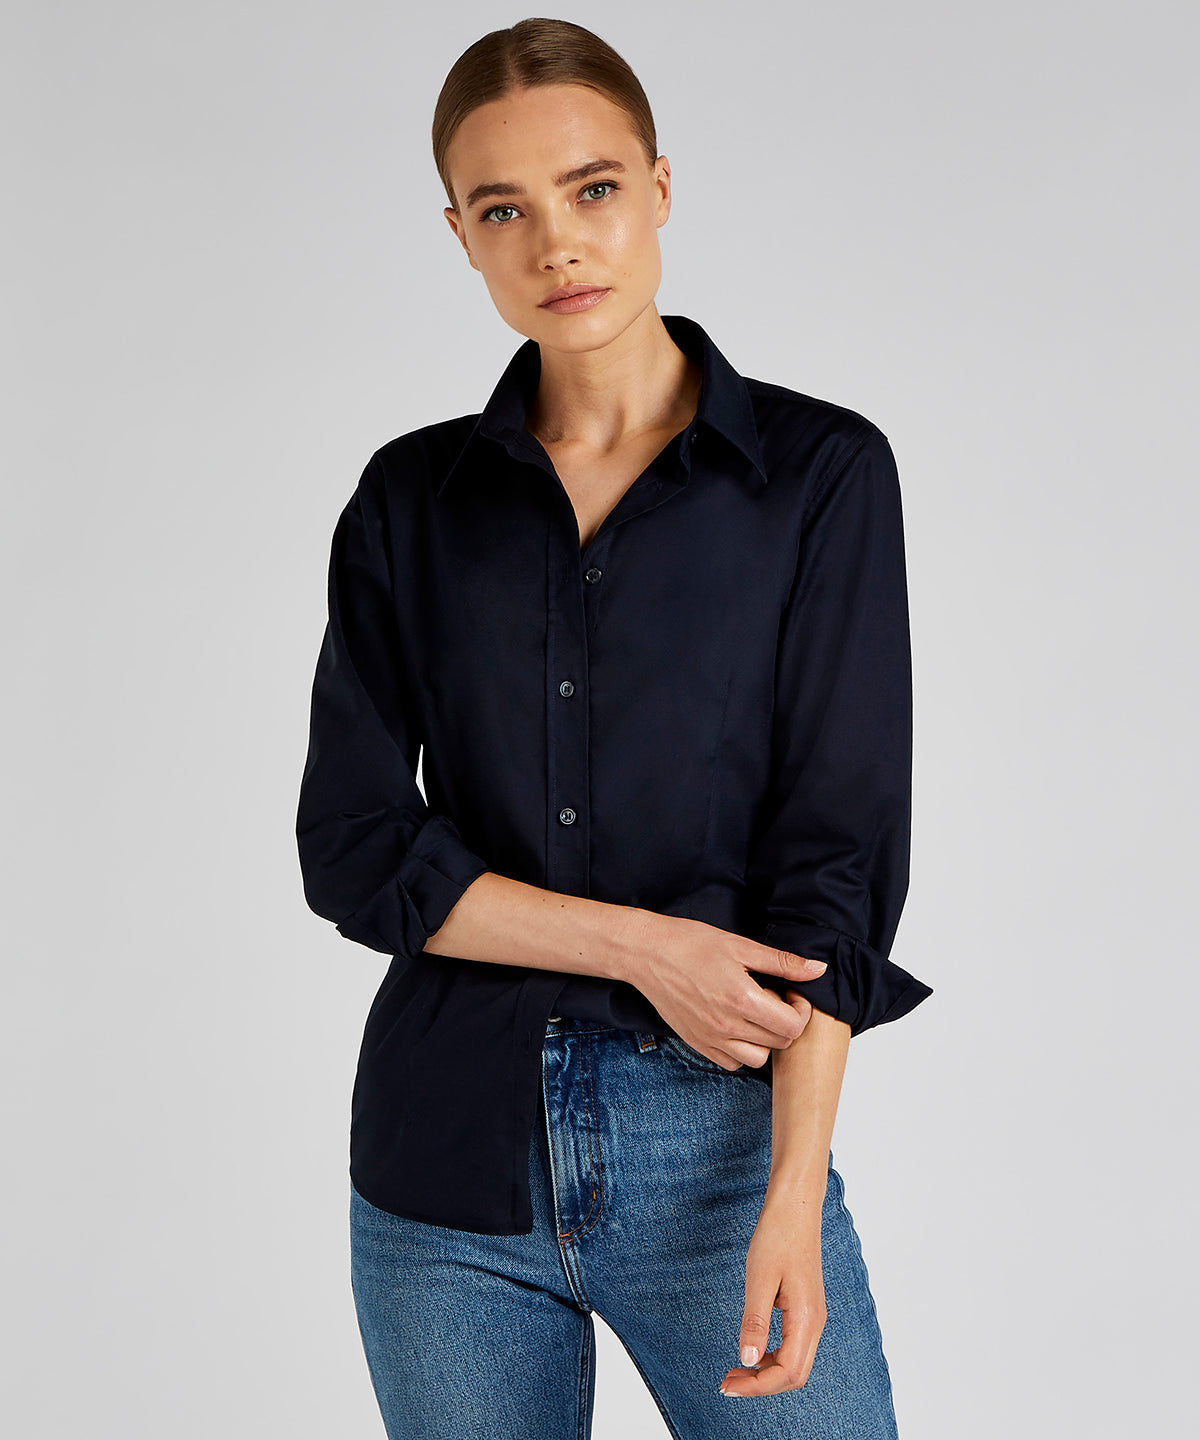 Blússur - Women's Workplace Oxford Blouse Long-sleeved (tailored Fit)